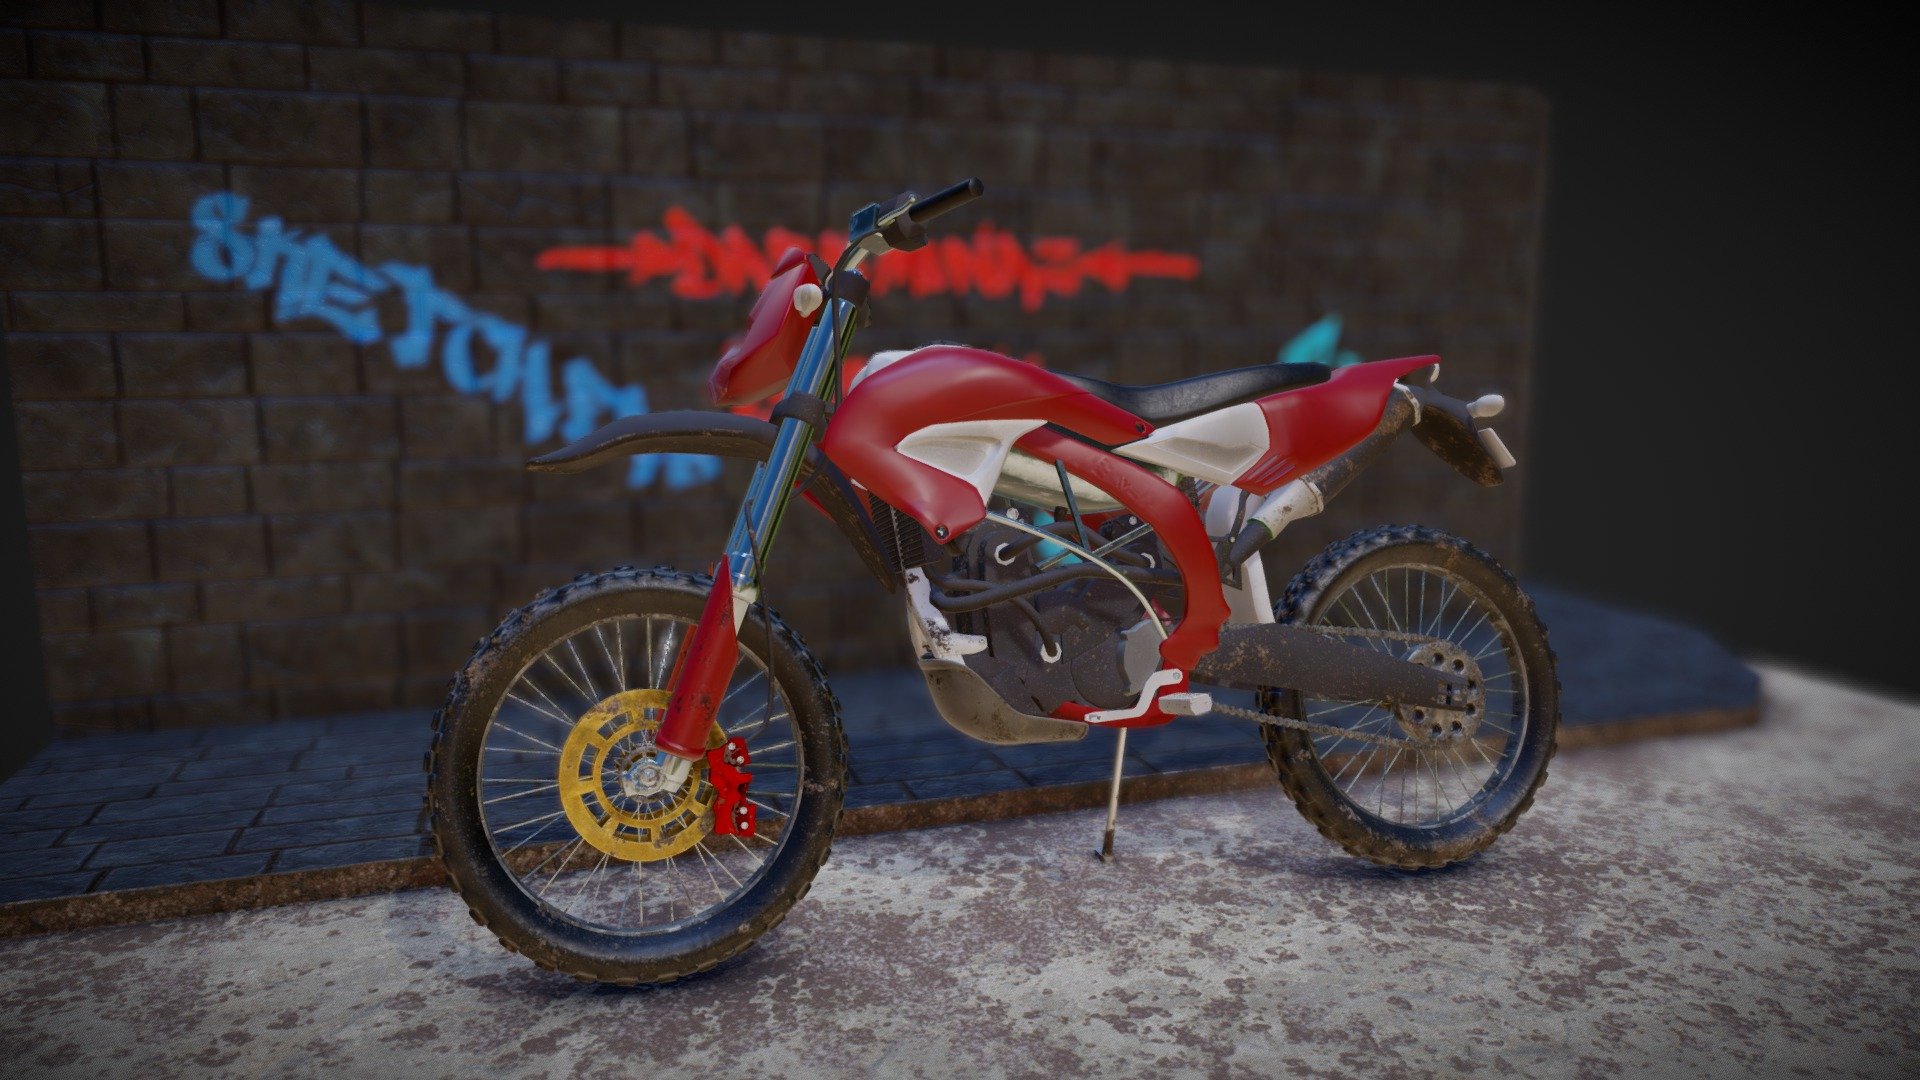 Updated a few parts, changed some colors and created a little scene.

Now with added DOF
https://blog.sketchfab.com/add-another-layer-realism-depth-field/ - Motorbike, Parked in Scene - Buy Royalty Free 3D model by dark-minaz 3d model